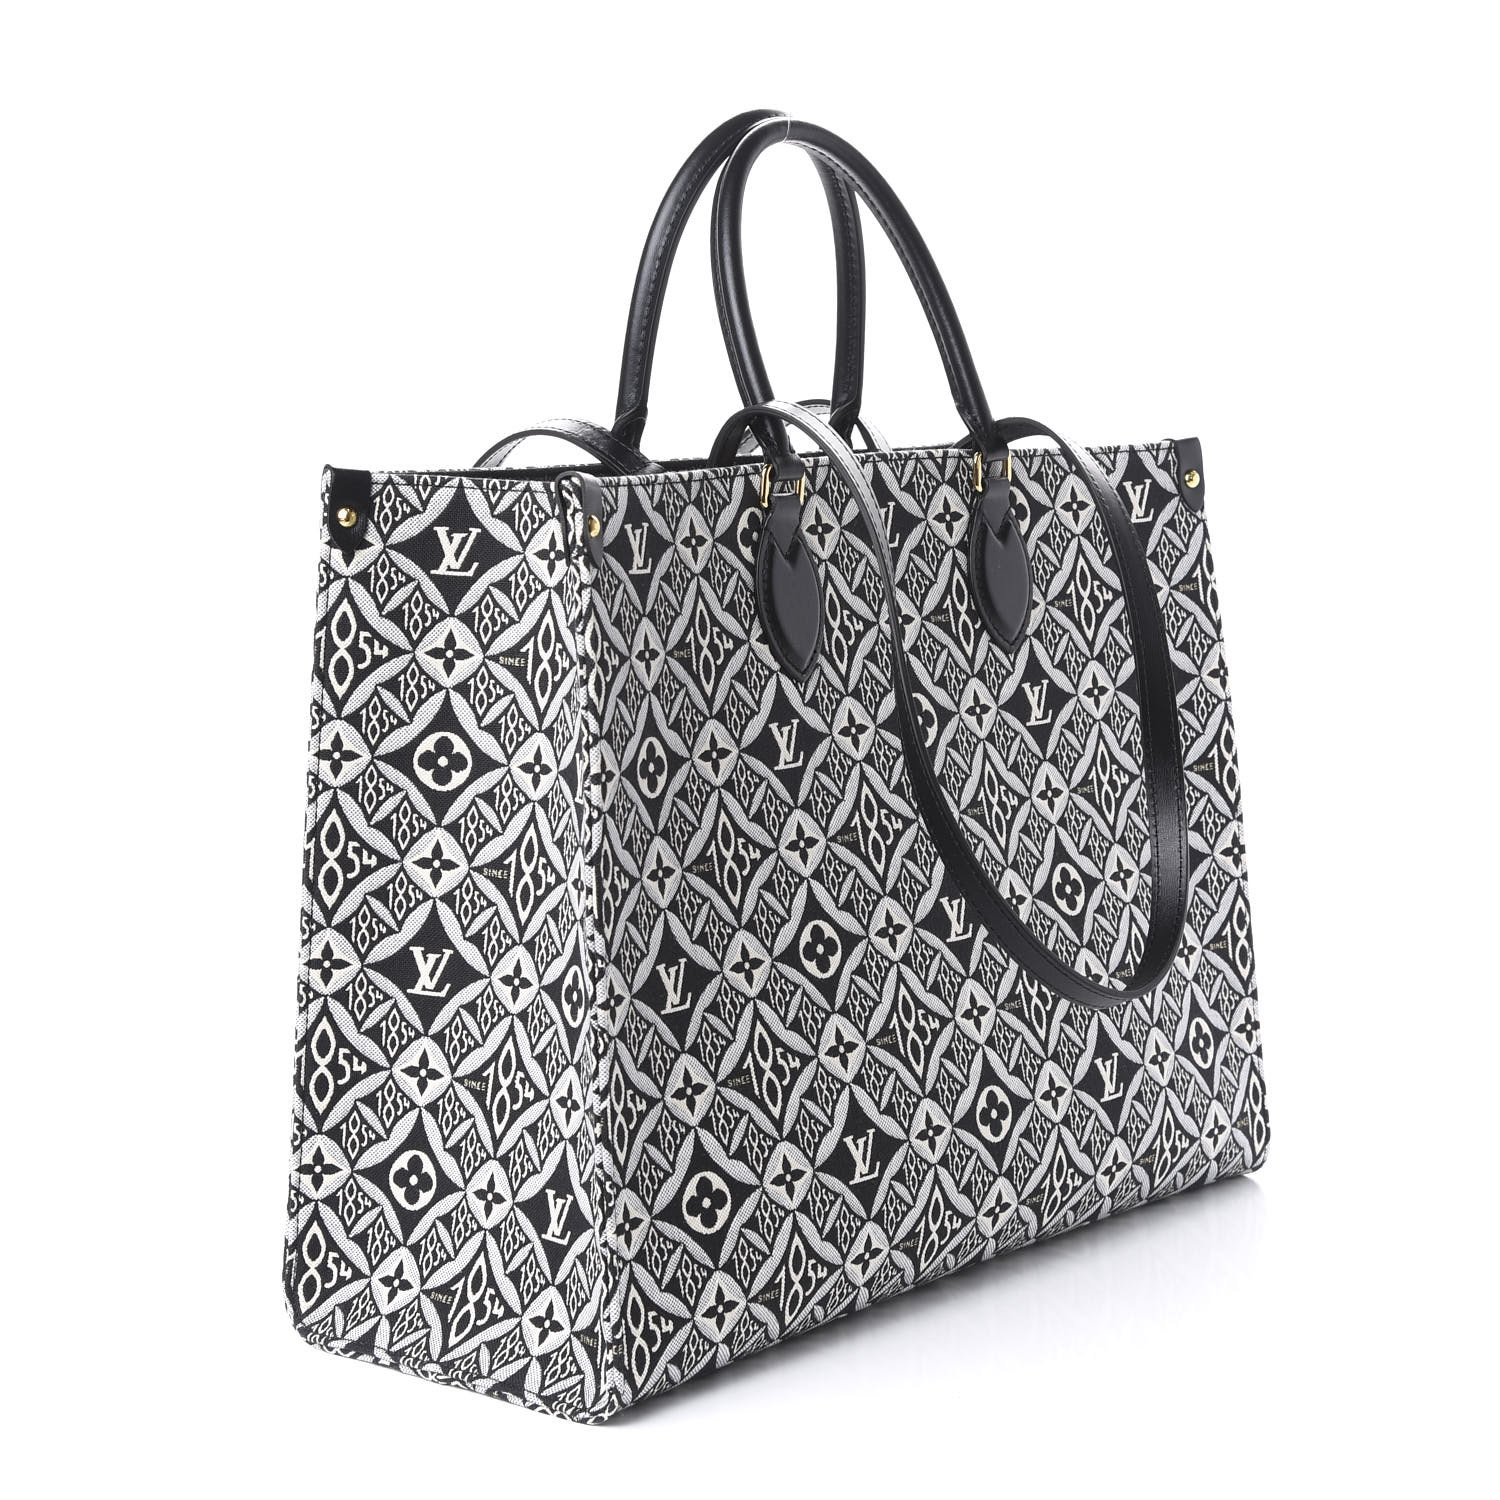 OnTheGo Tote Limited Edition Since 1854 Monogram Jacquard GM